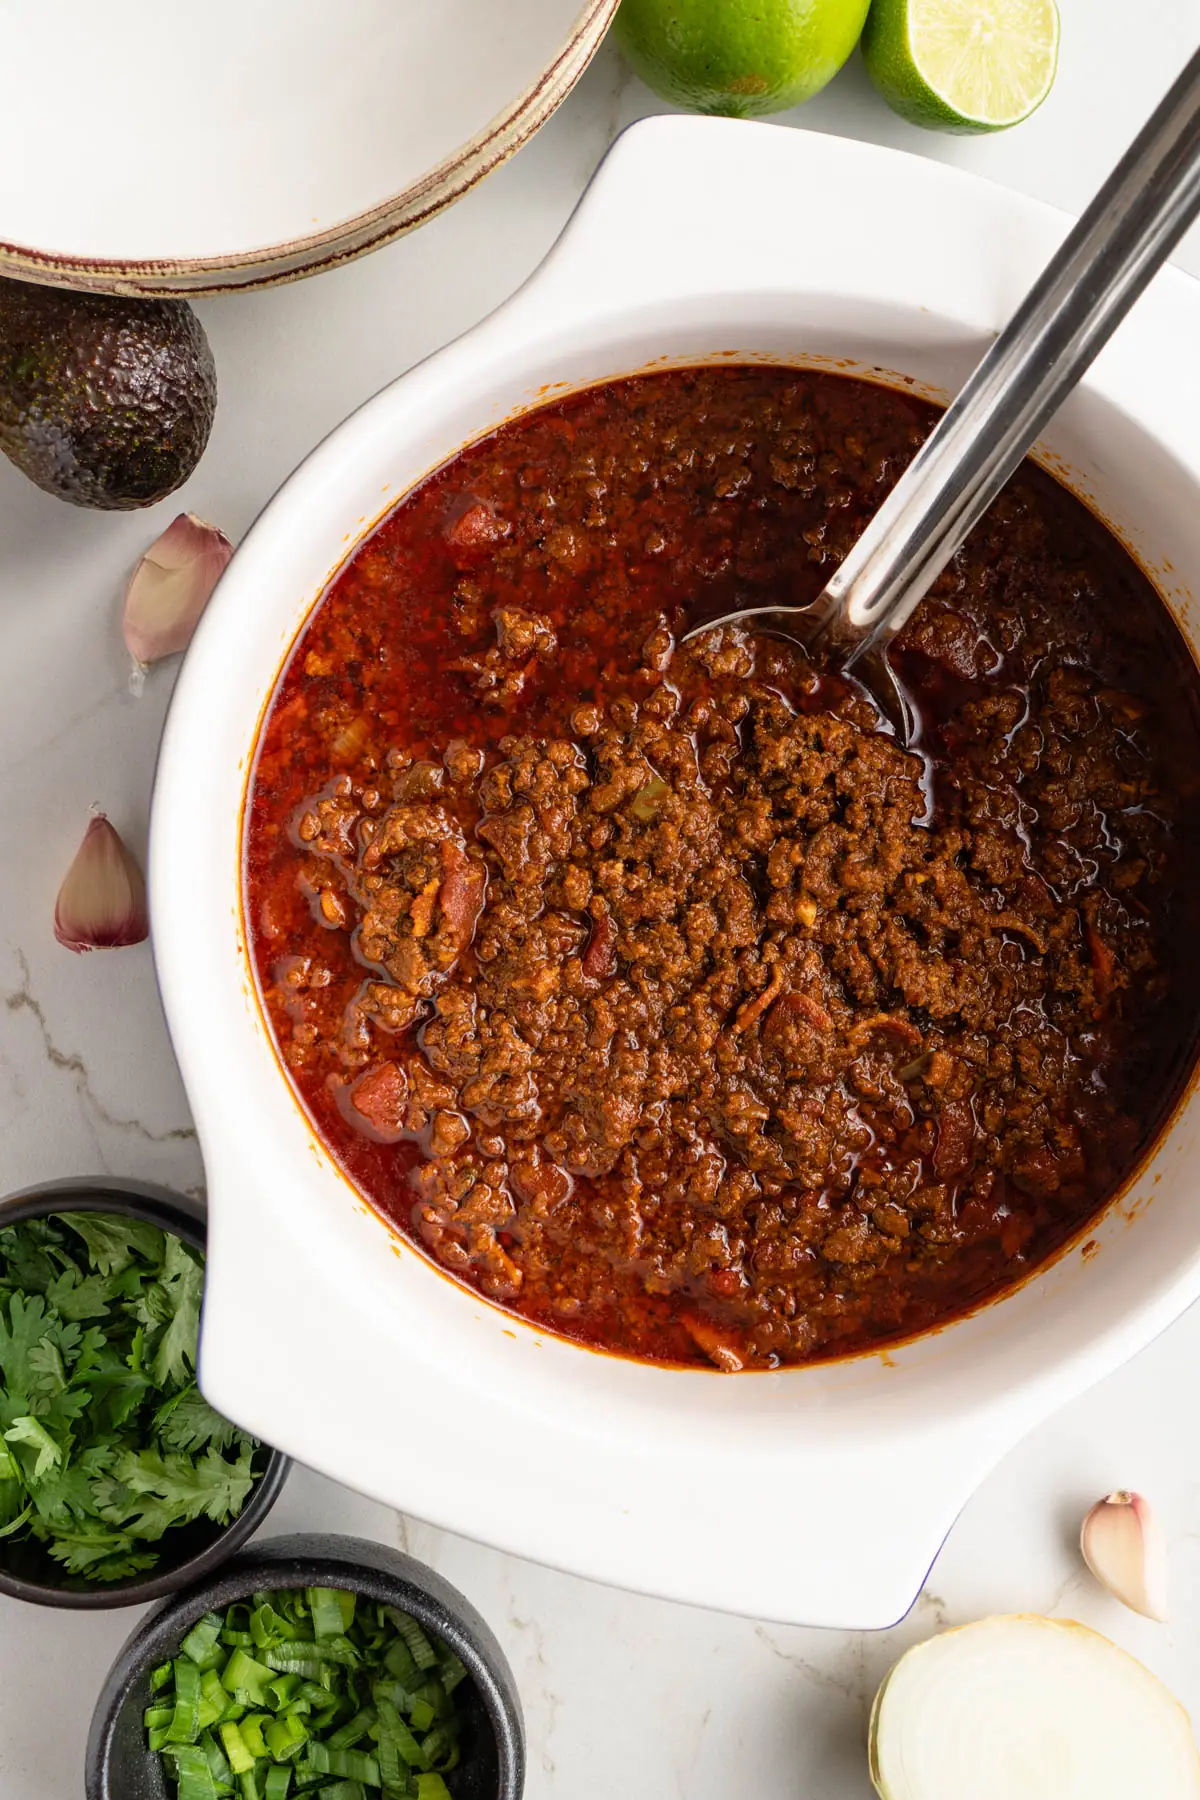 Full pot of chili with serving spoon.